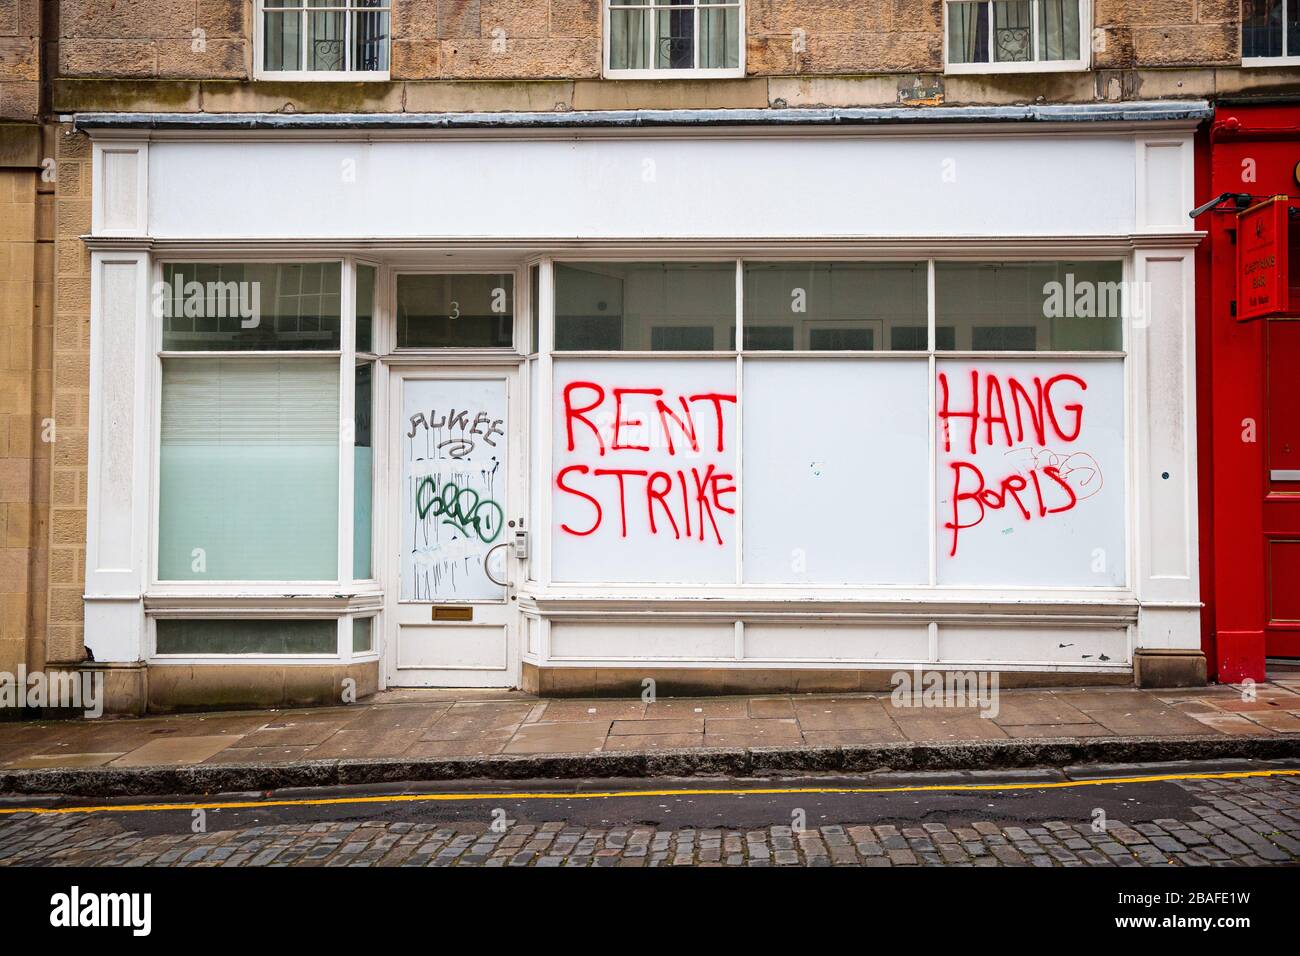 Edinburgh, Scotland, UK. 27th Mar, 2020. Fresh graffiti has appeared amid the Coronavirus pandemic, this reading “Rent Strike” and “Hang Boris”. The Scottish Government are yet to announce any specific support for renters in the private rented sector. Credit: Andrew Perry/Alamy Live News Stock Photo